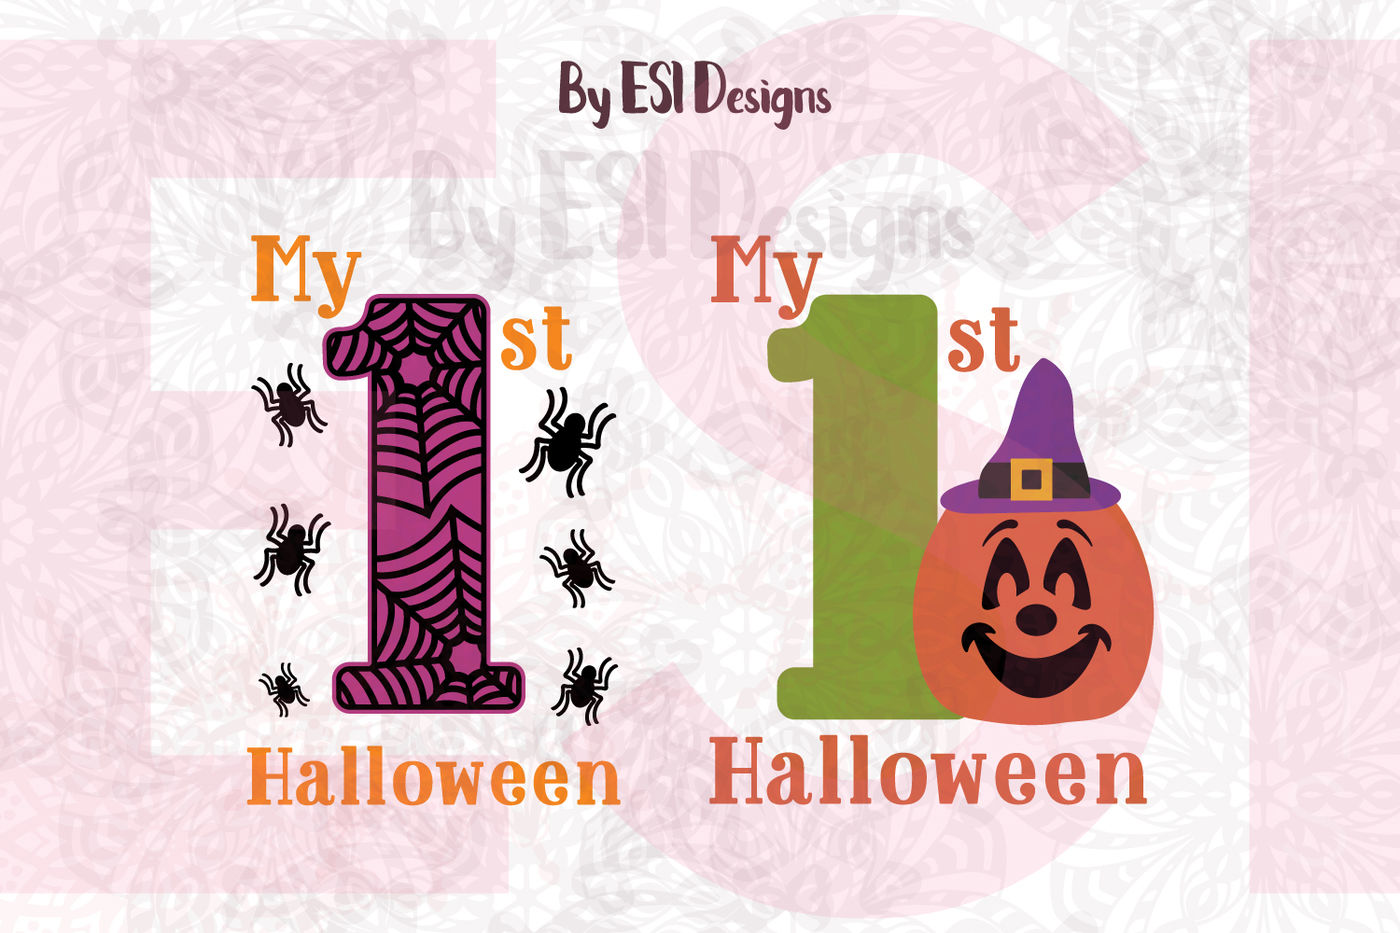 My 1st Halloween Designs Svg Dxf Eps Png Cutting Files Clipart Sublimation By Esi Designs Thehungryjpeg Com